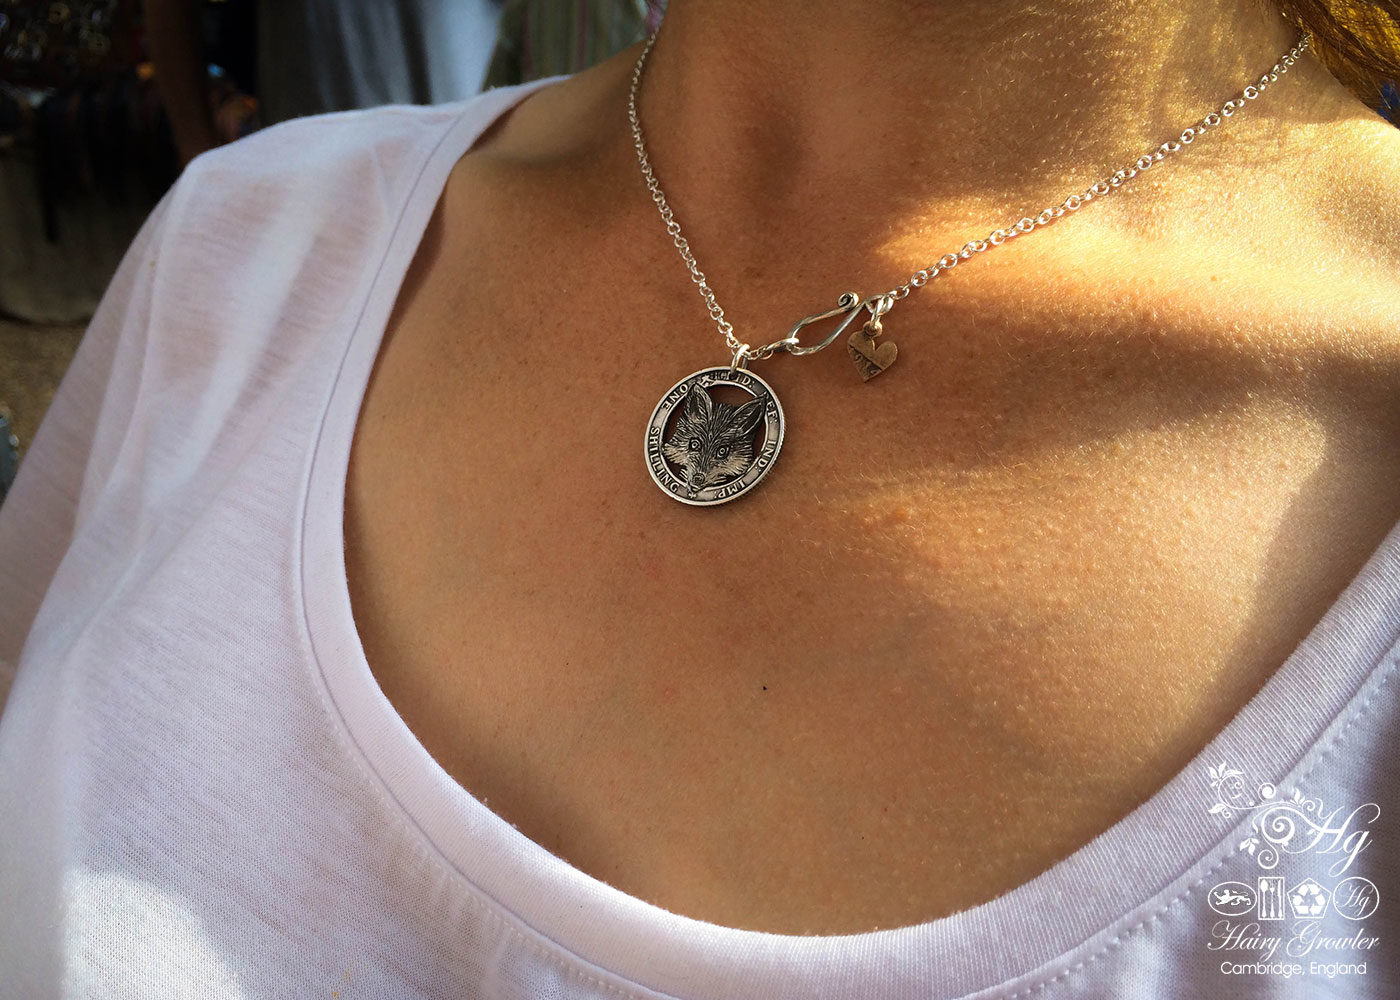 Handcrafted and recycled silver shilling The Silver Shilling collection. silver fox necklace totally handcrafted and recycled from old sterling silver shilling coins. Designed and created by Hairy Growler Jewellery, Cambridge, UK. necklace